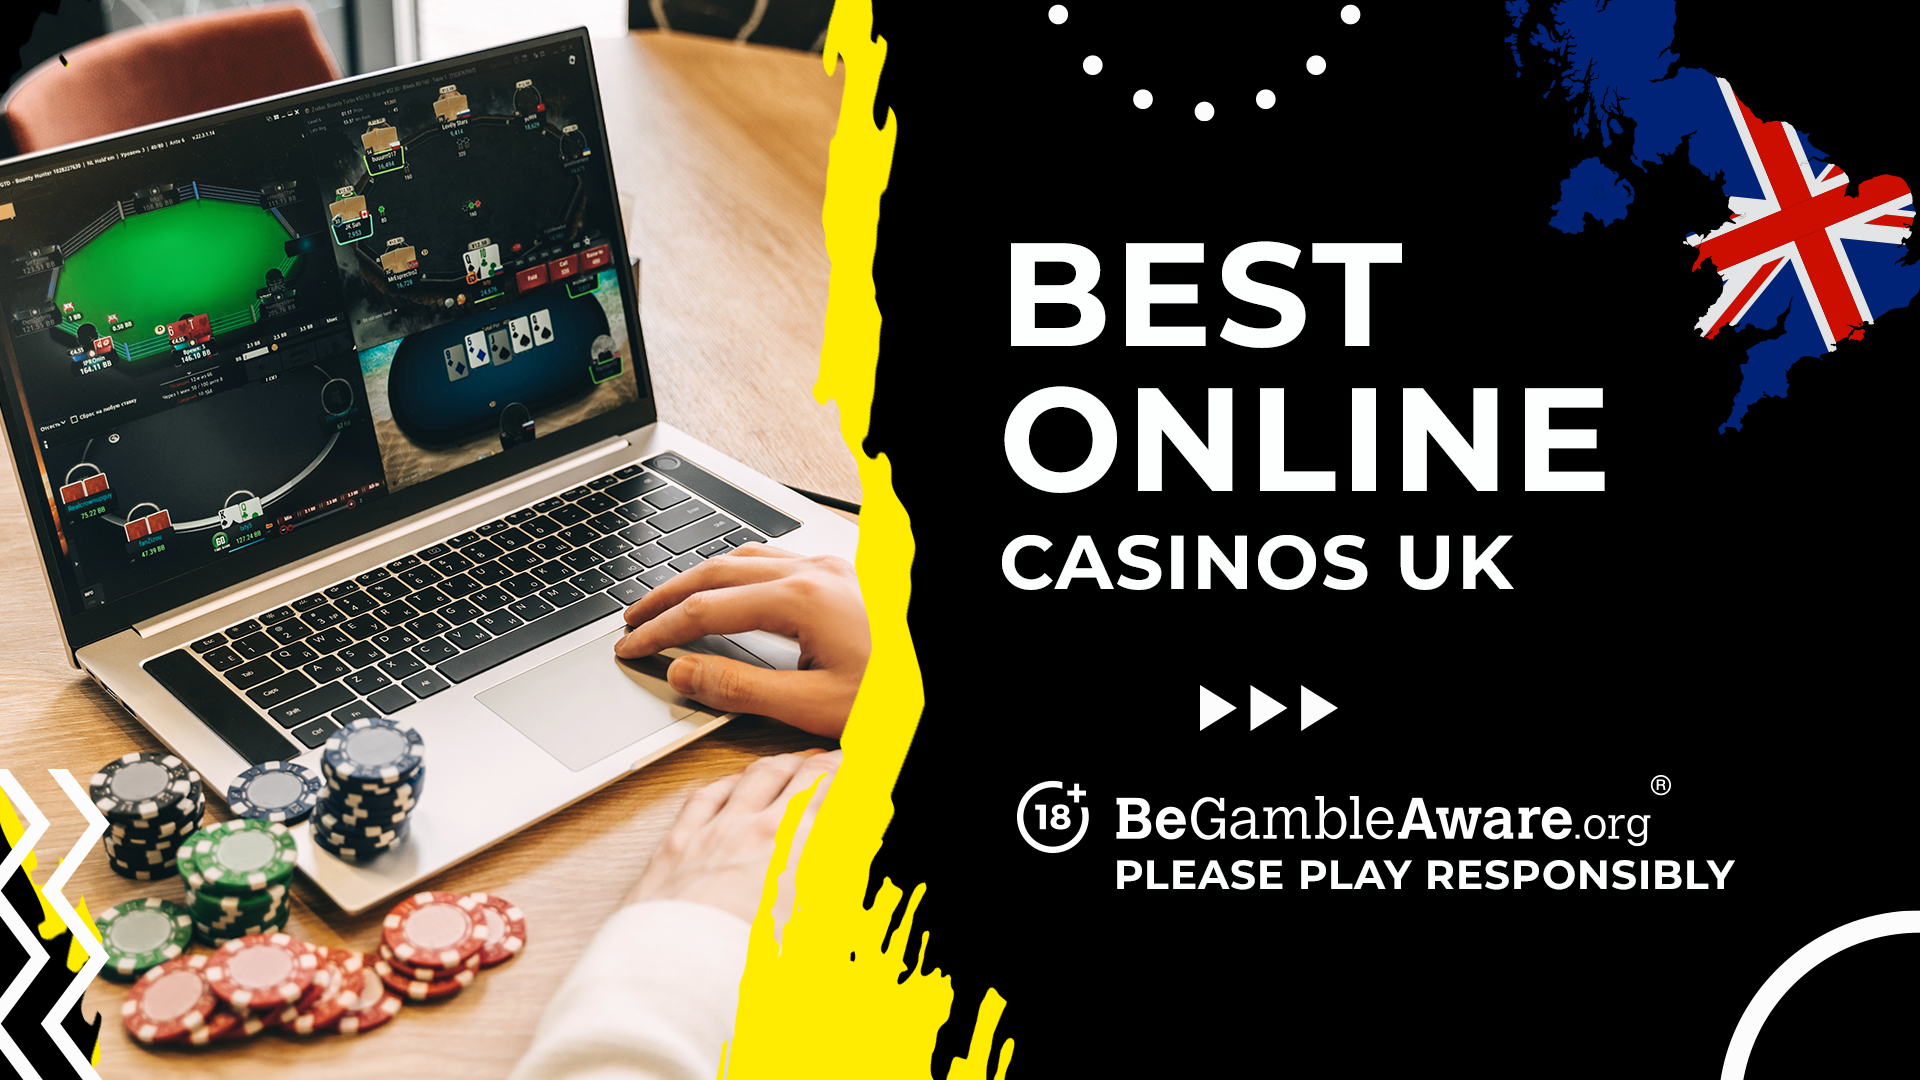 Apply Any Of These 10 Secret Techniques To Improve Which slots to choose at online casinos